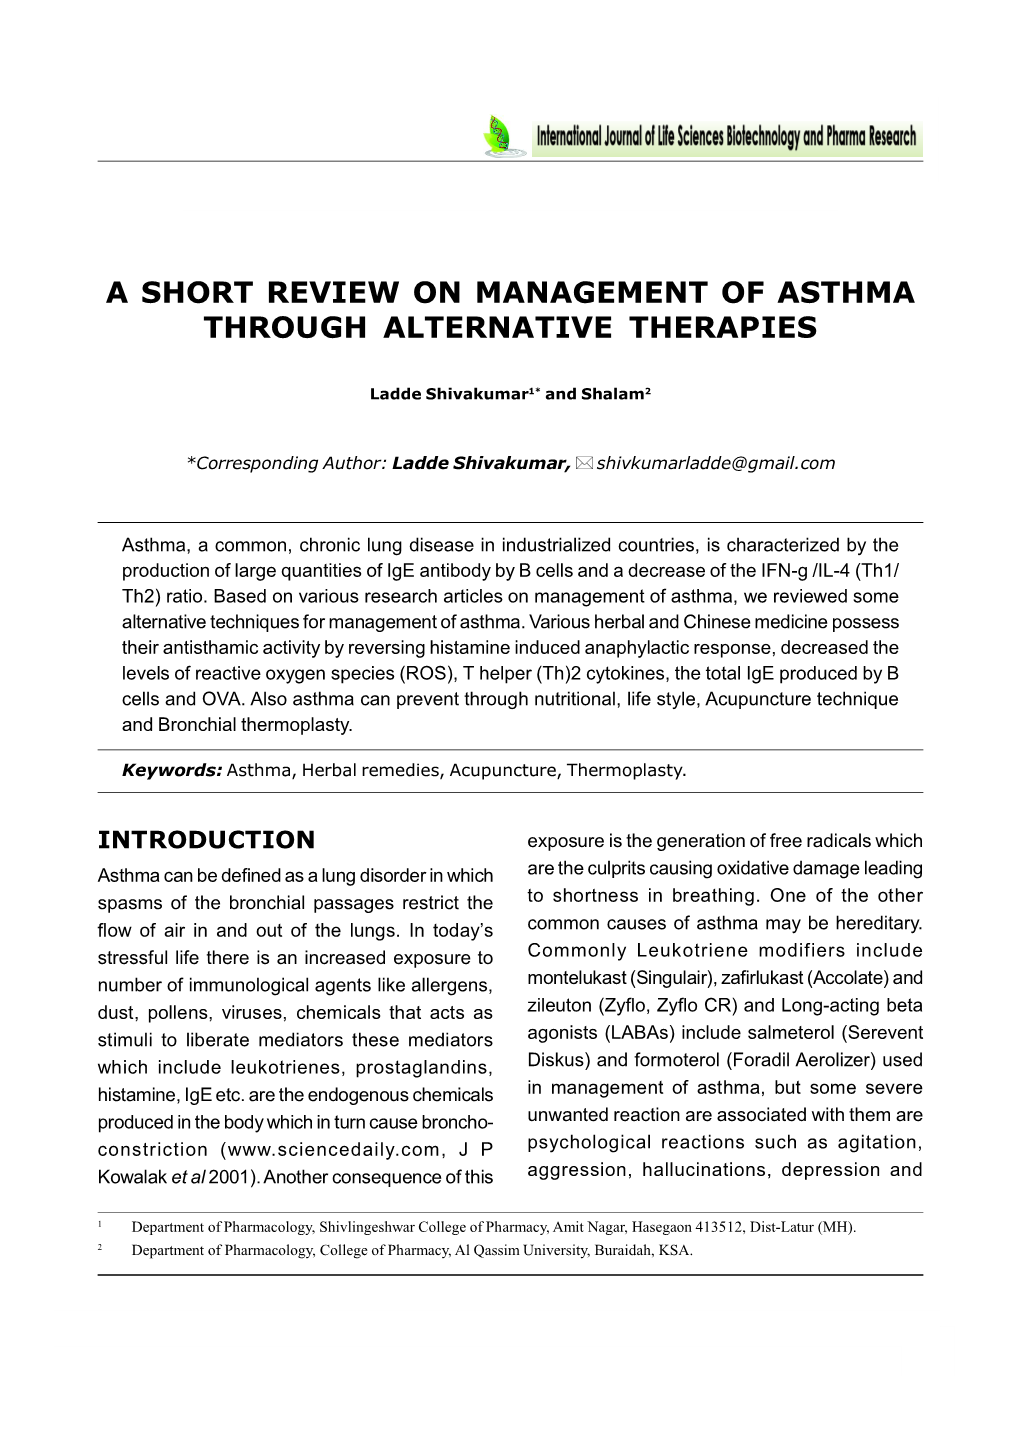 A Short Review on Management of Asthma Through Alternative Therapies